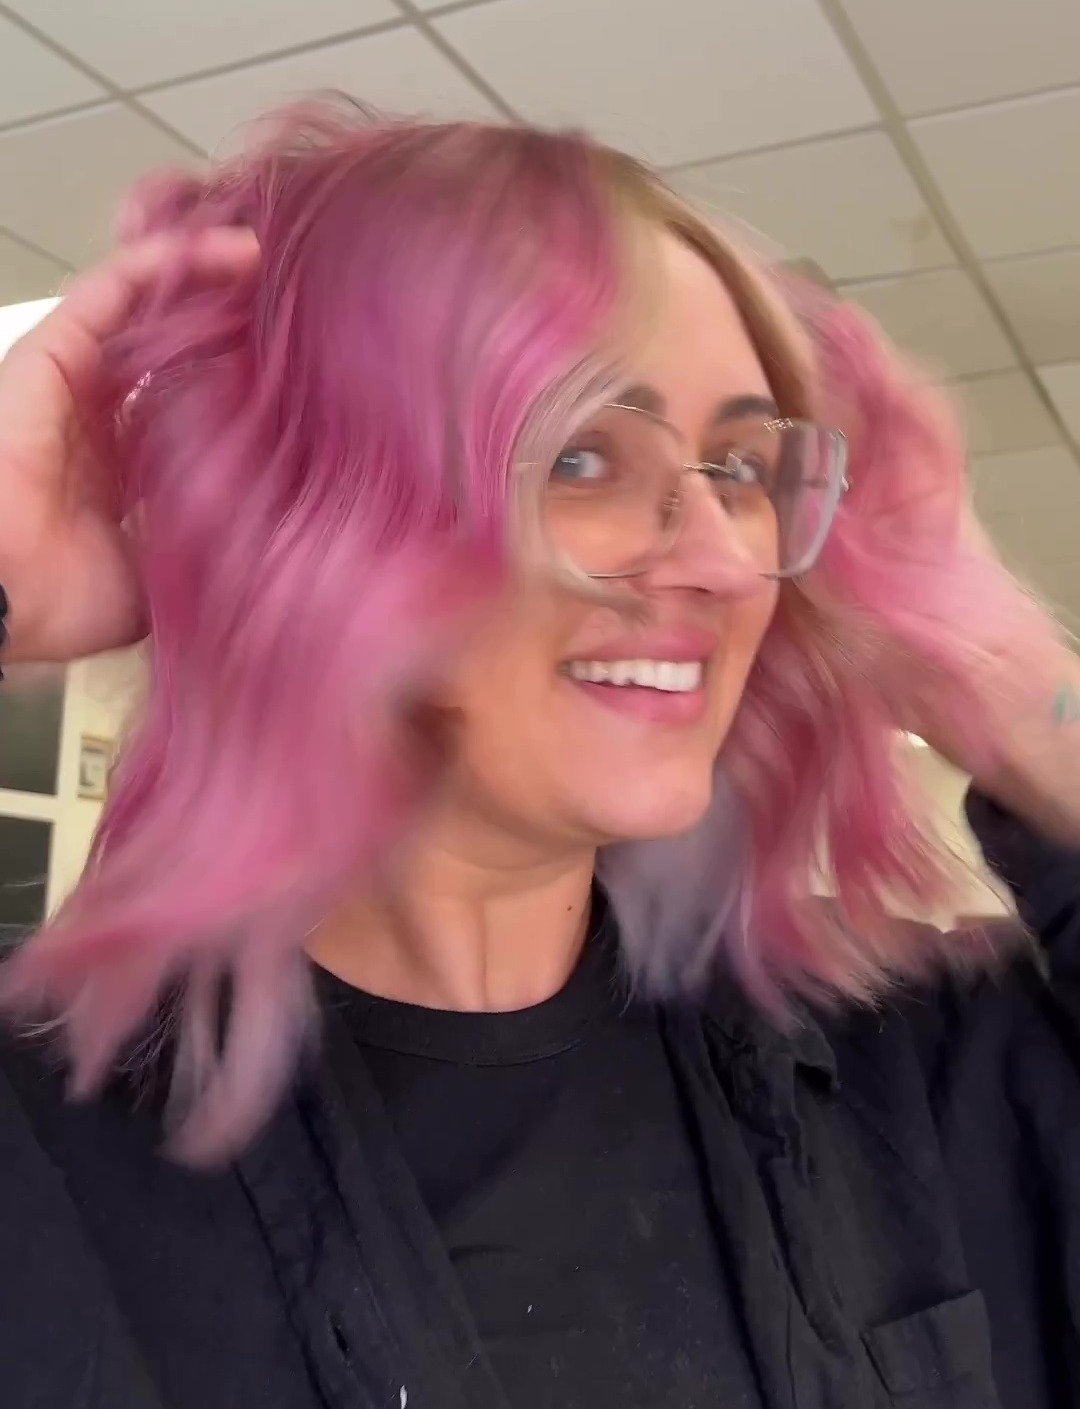 Gogglebox star Ellie Warner reveals incredible hair transformation as she takes her baby to the salon